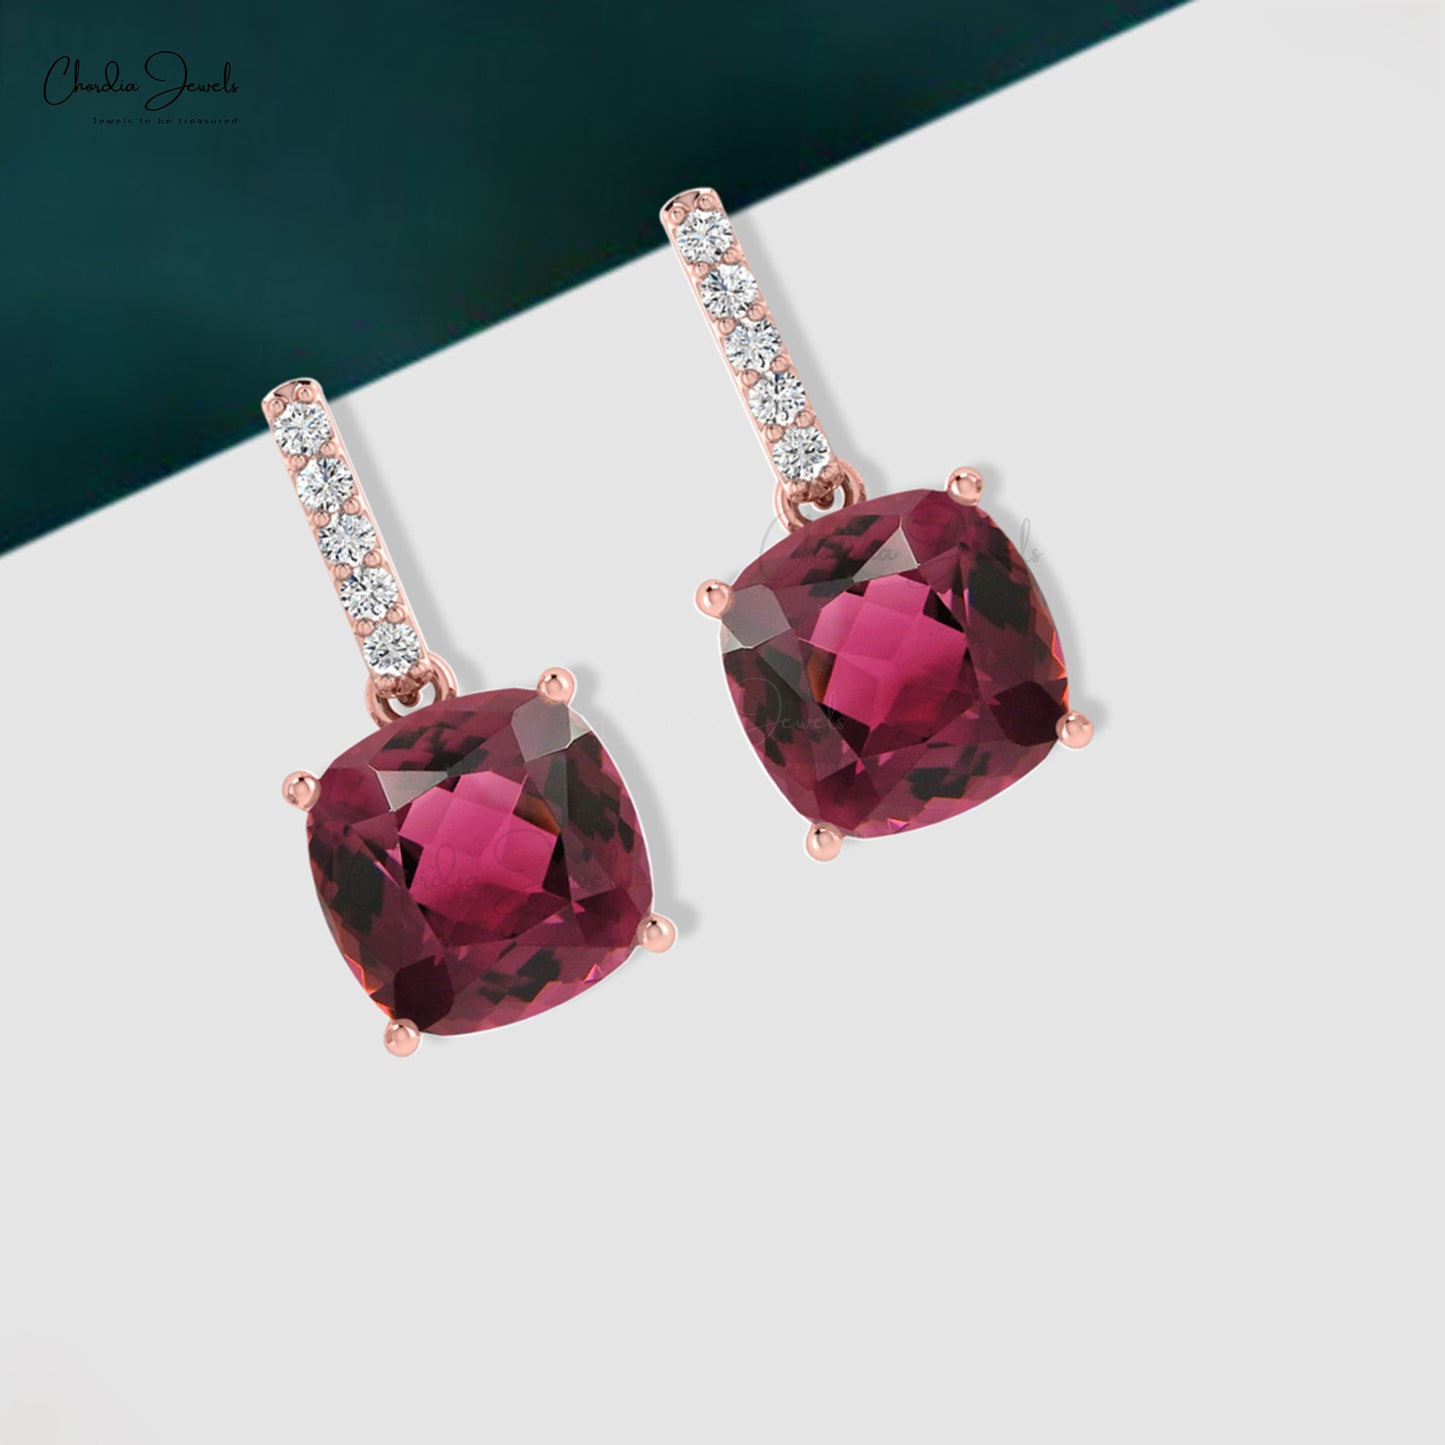 Load image into Gallery viewer, Natural 14K Gold Pink Tourmaline Diamond Dangler Earrings For Gift October Birthstone
